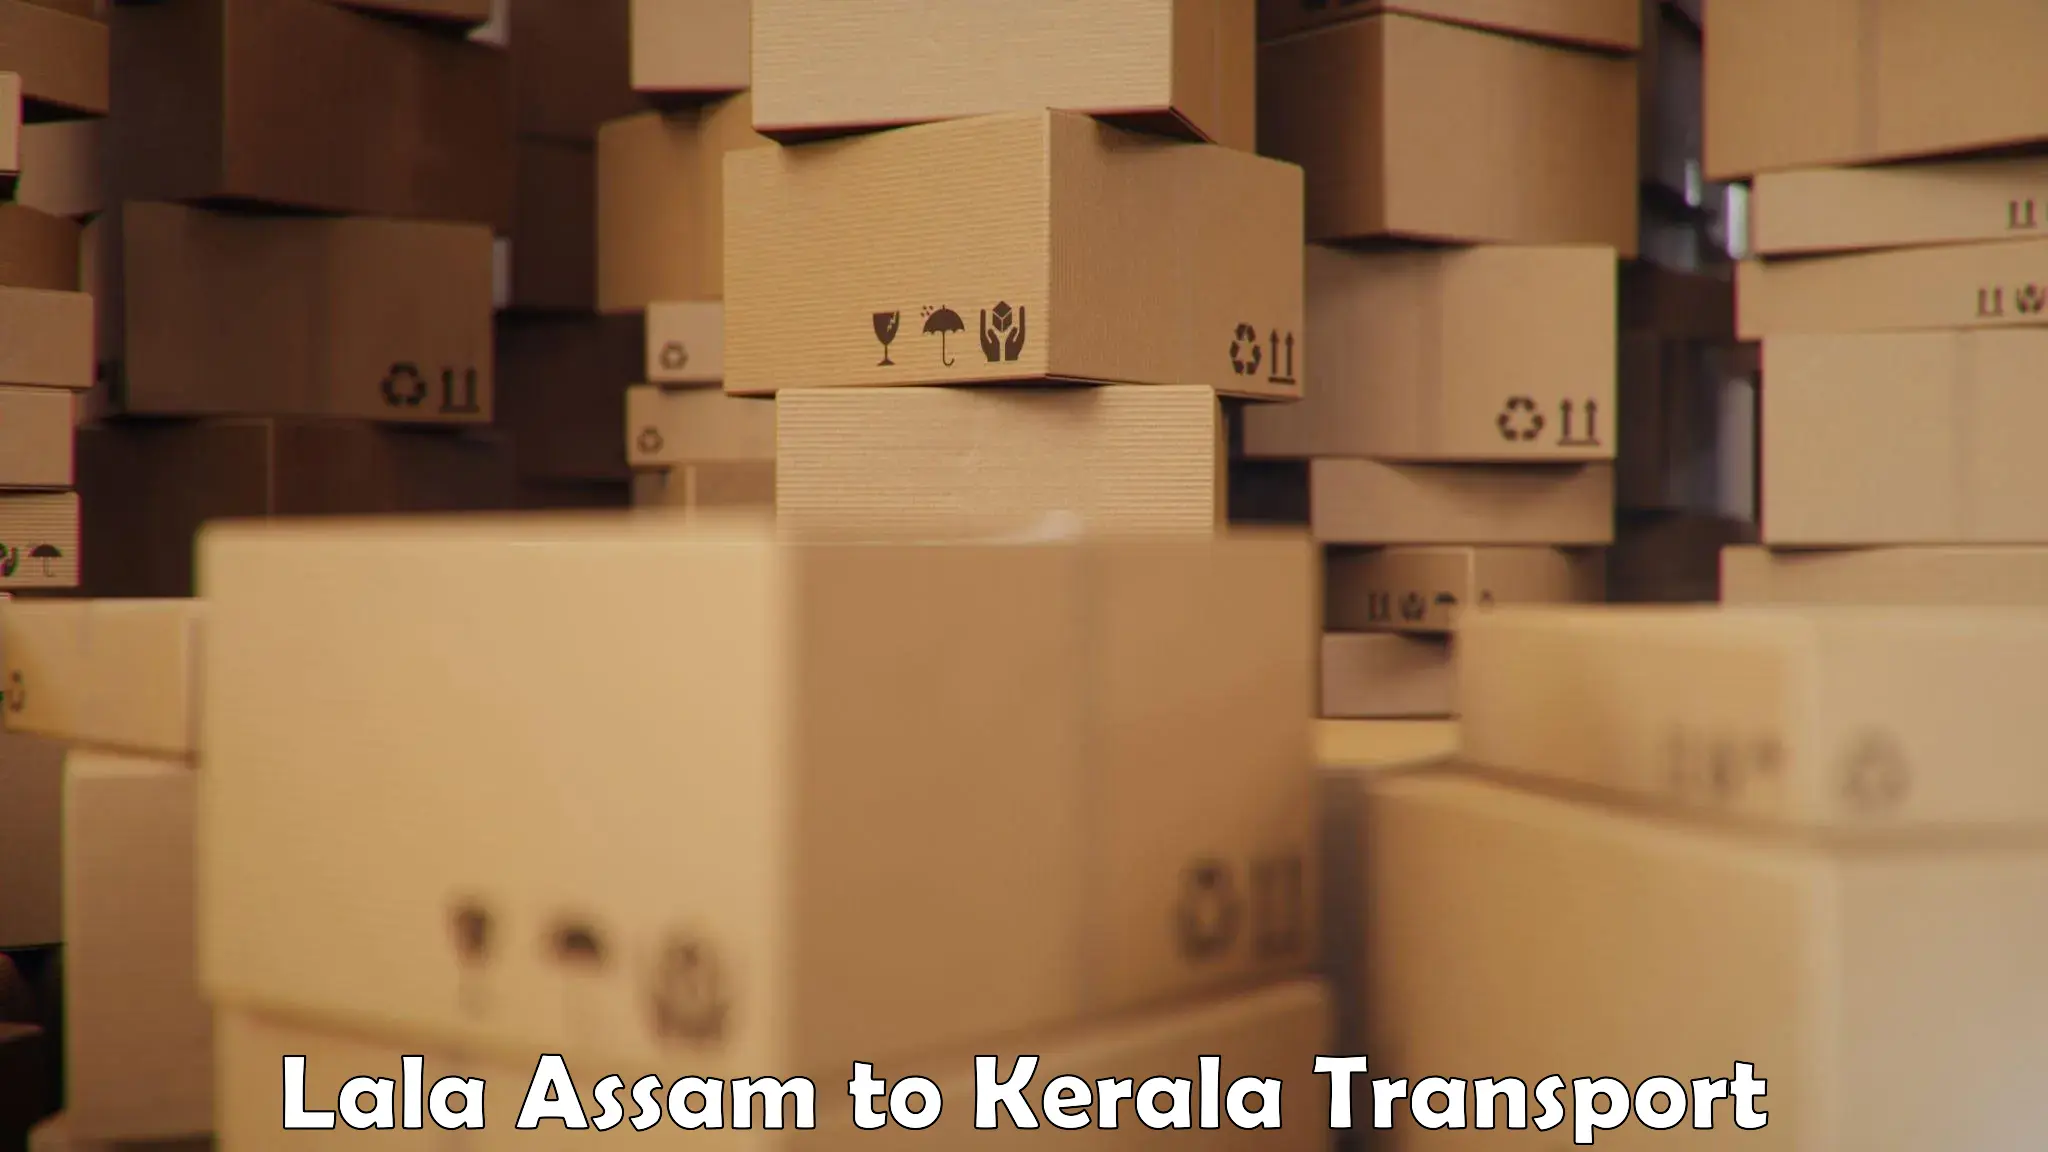 Delivery service Lala Assam to Kozhikode